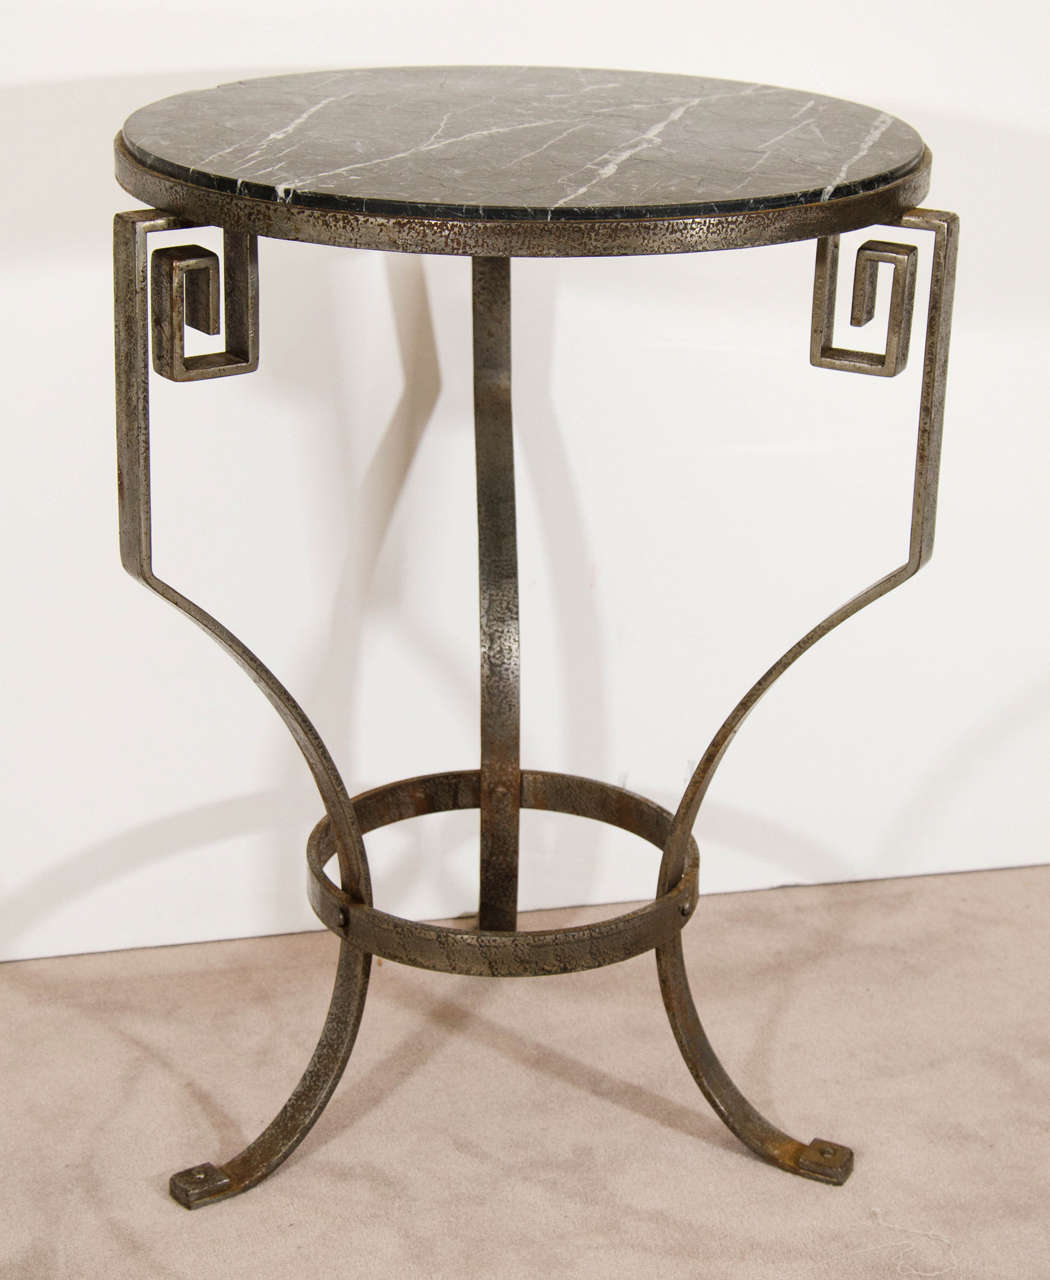  Spectacular Pair of black marble with white veining and Wrought Iron Frames   with Gorgeous Greek Key accents. Fantastic Side Tables in a High End Living Room.Very High End and Substantially Constructed.